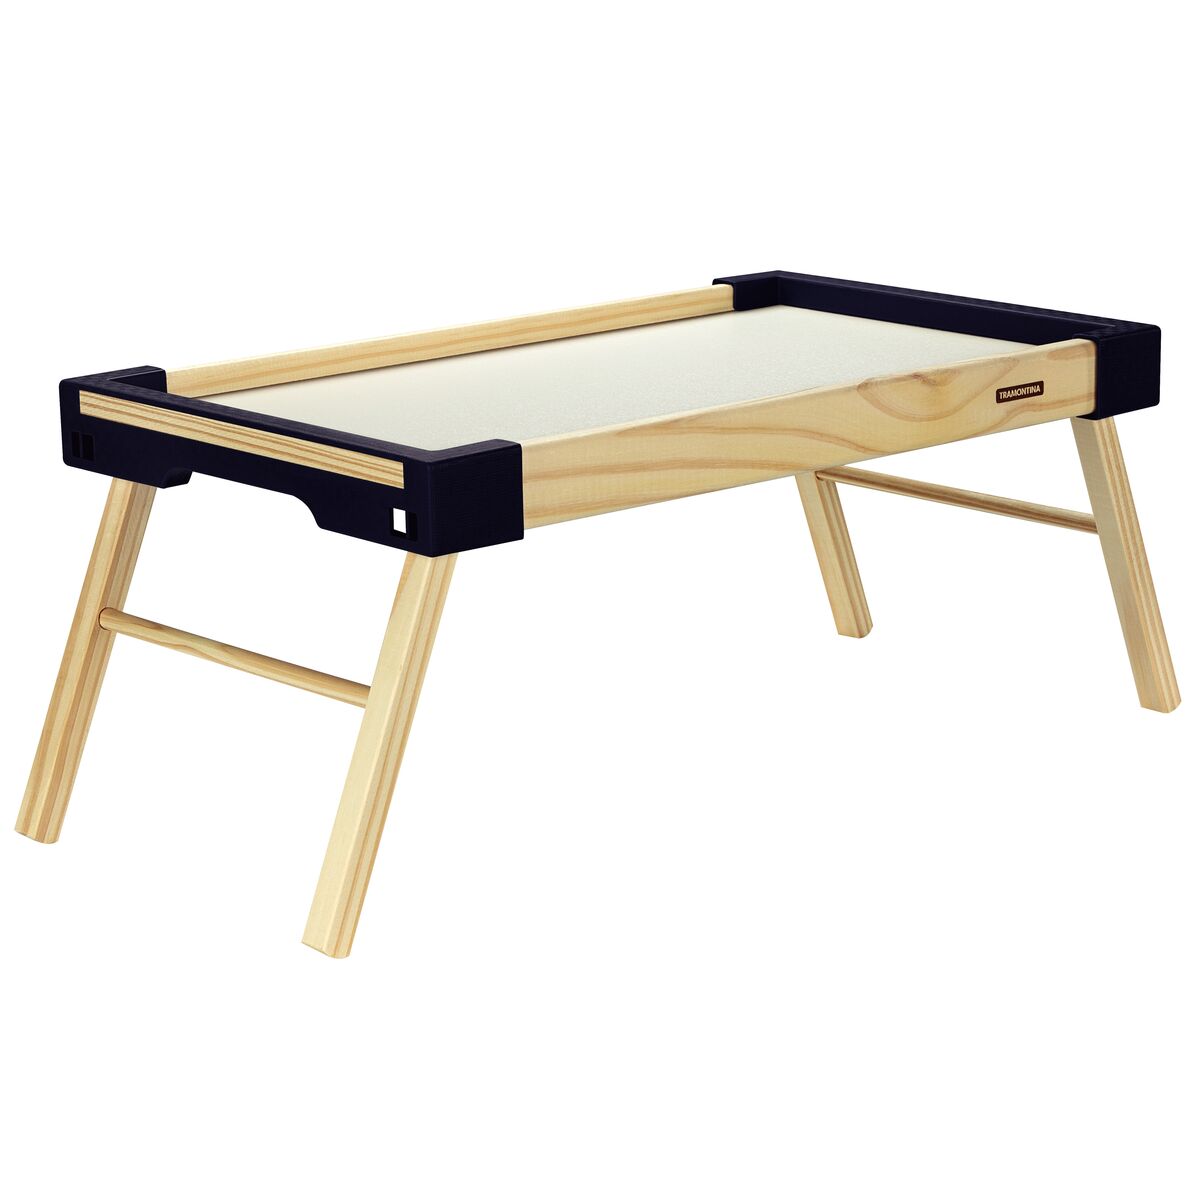 
Tramontina Happy Day Tray in Solid Wood with Black Polypropylene Sides and Folding Feet
